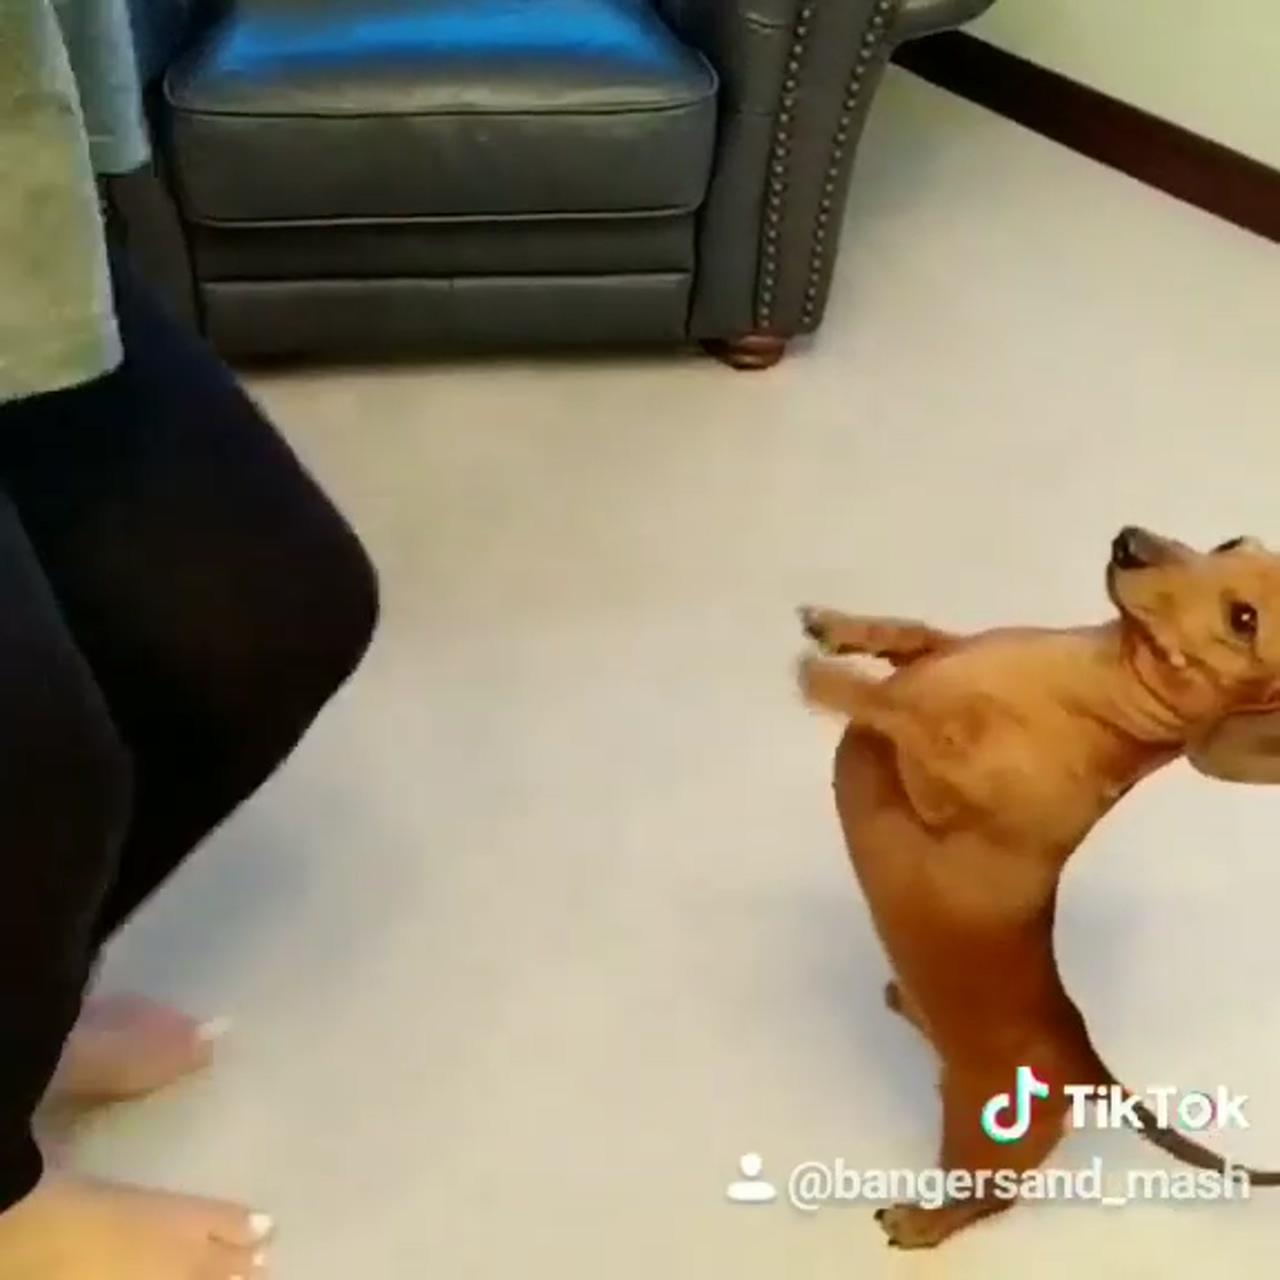 Oh, that's the challenge tiktok   | dachshund funny video